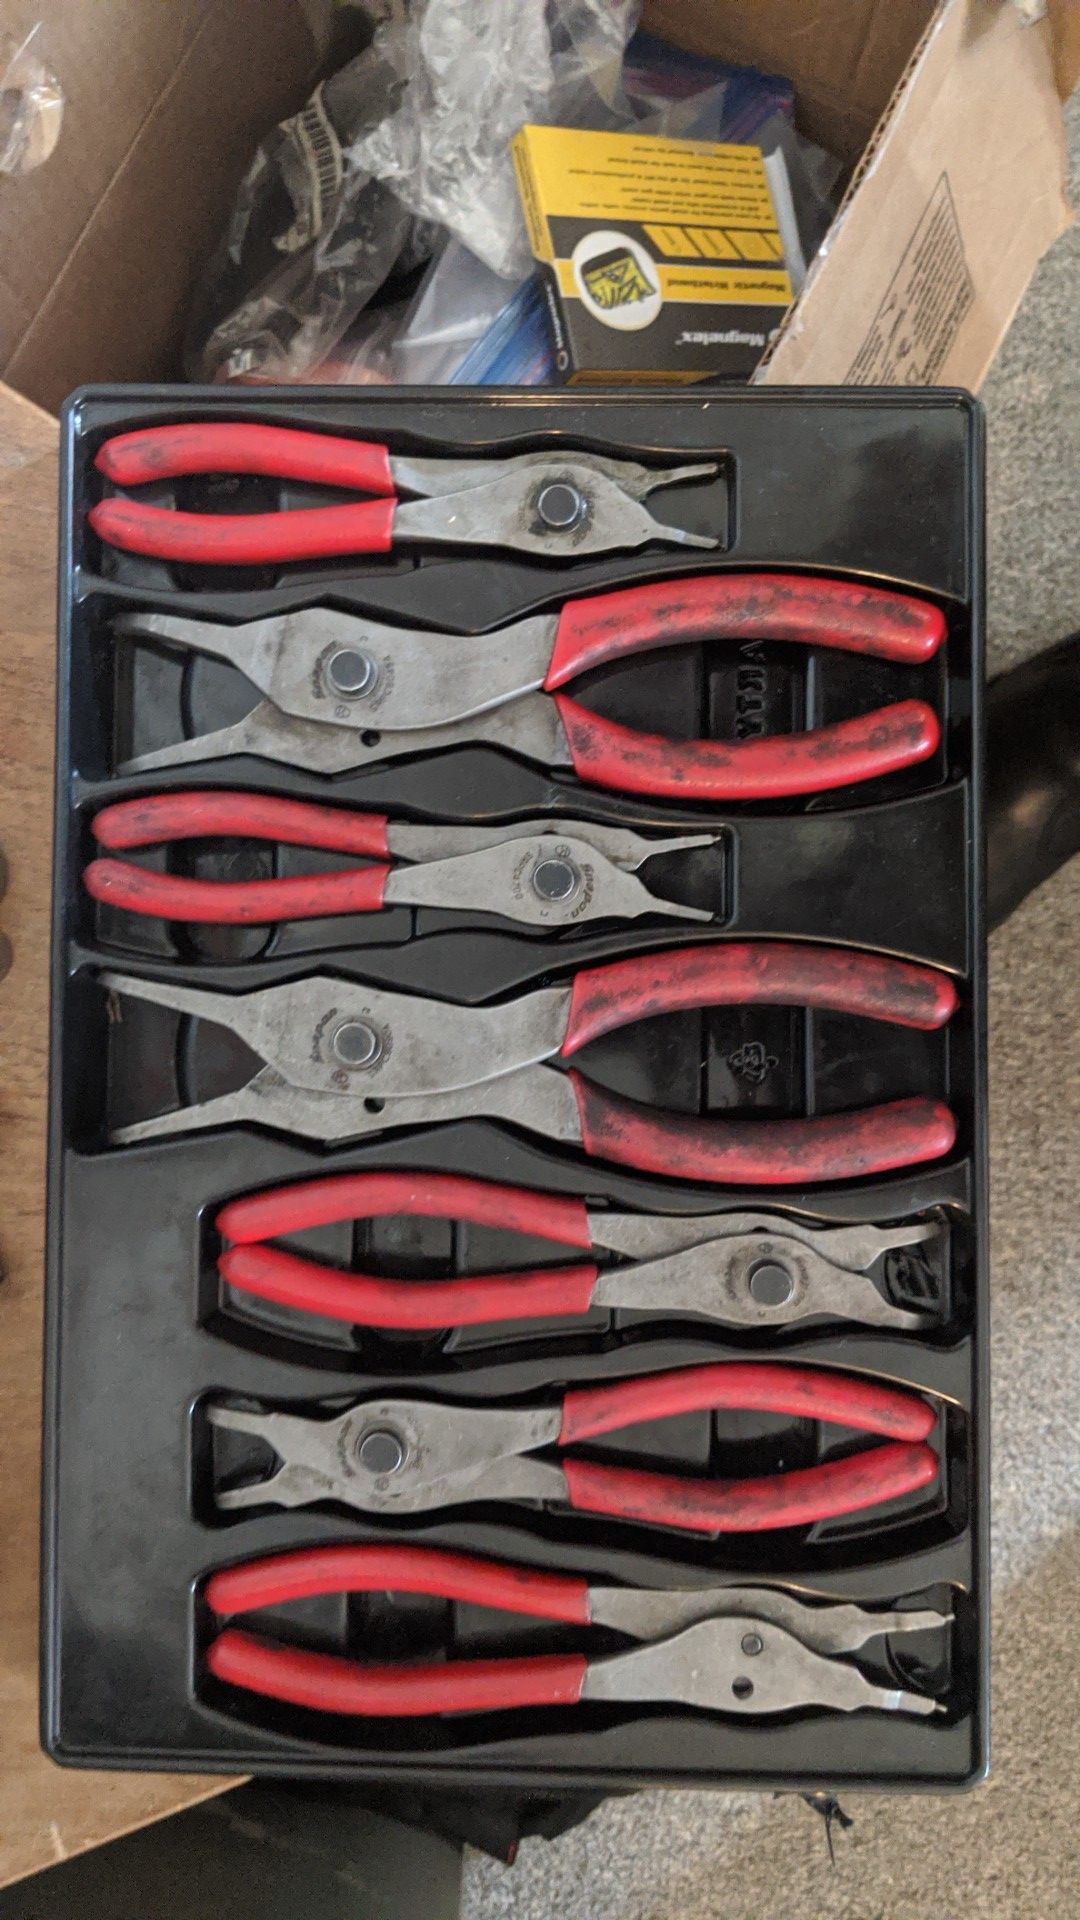 Snap-on Tools 7-piece Convertible Snap-ring Pliers Set